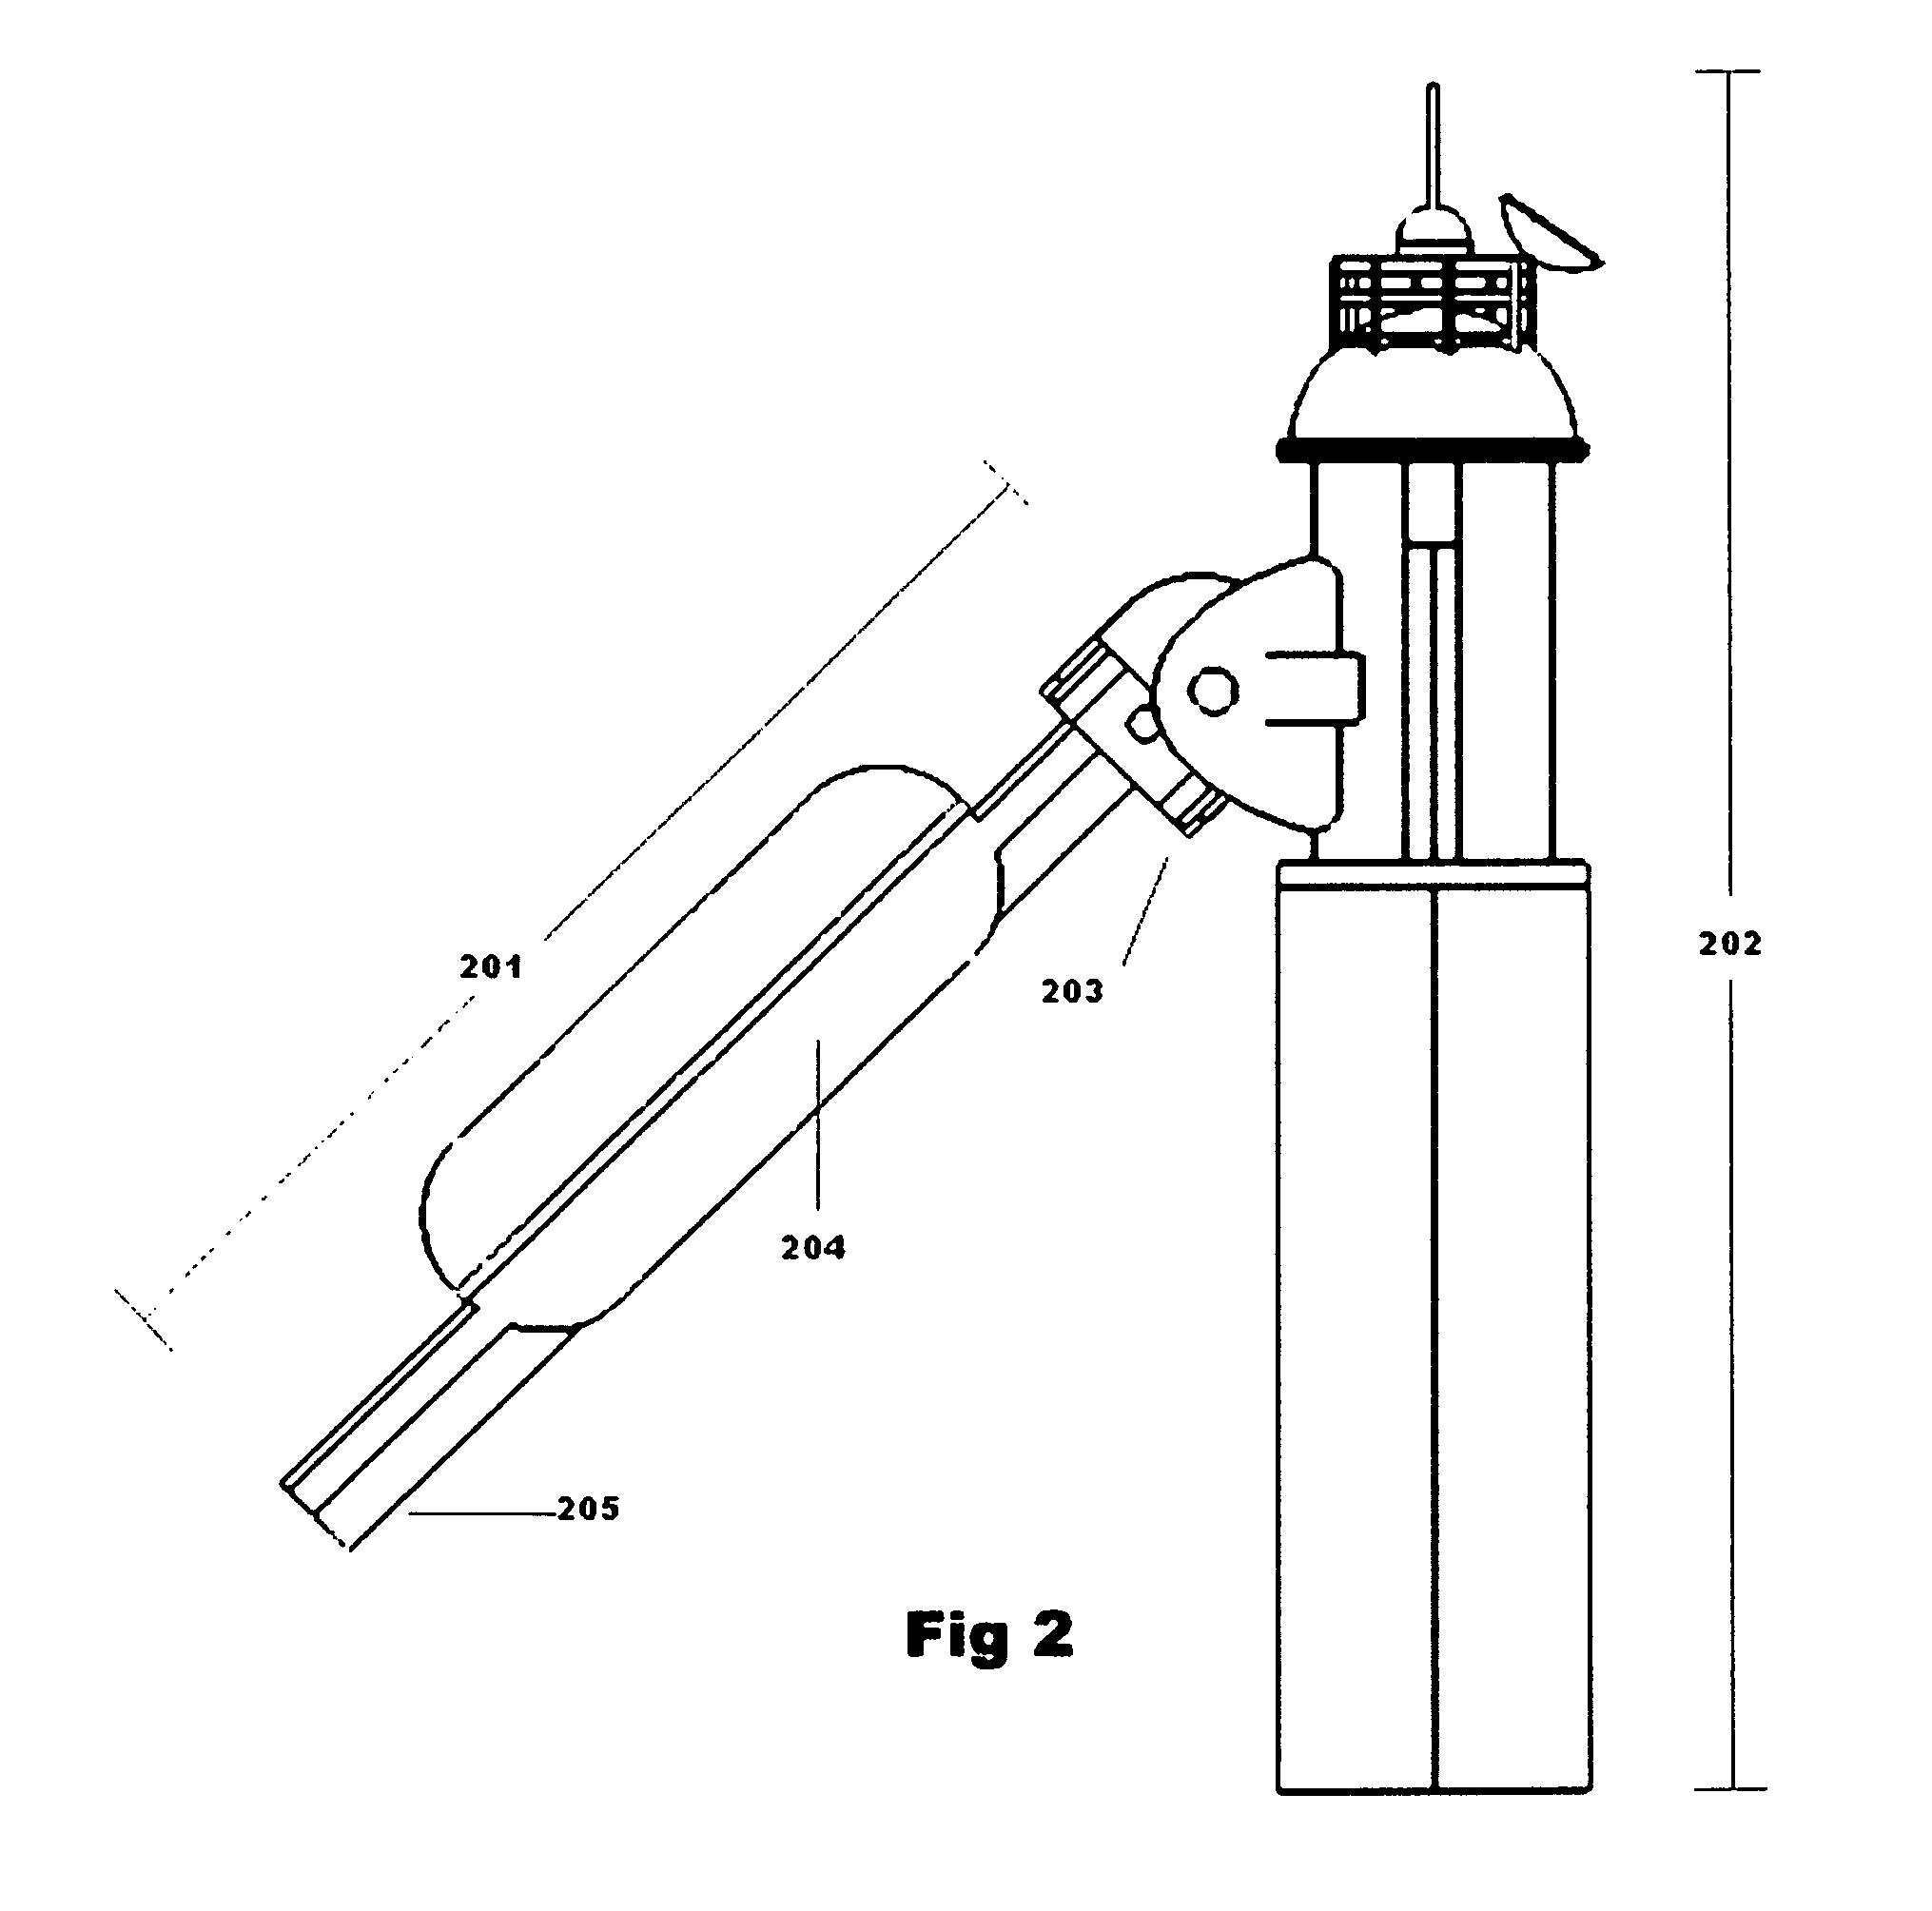 Trimming right-angularly reorienting extending segmented ocean wave power extraction system